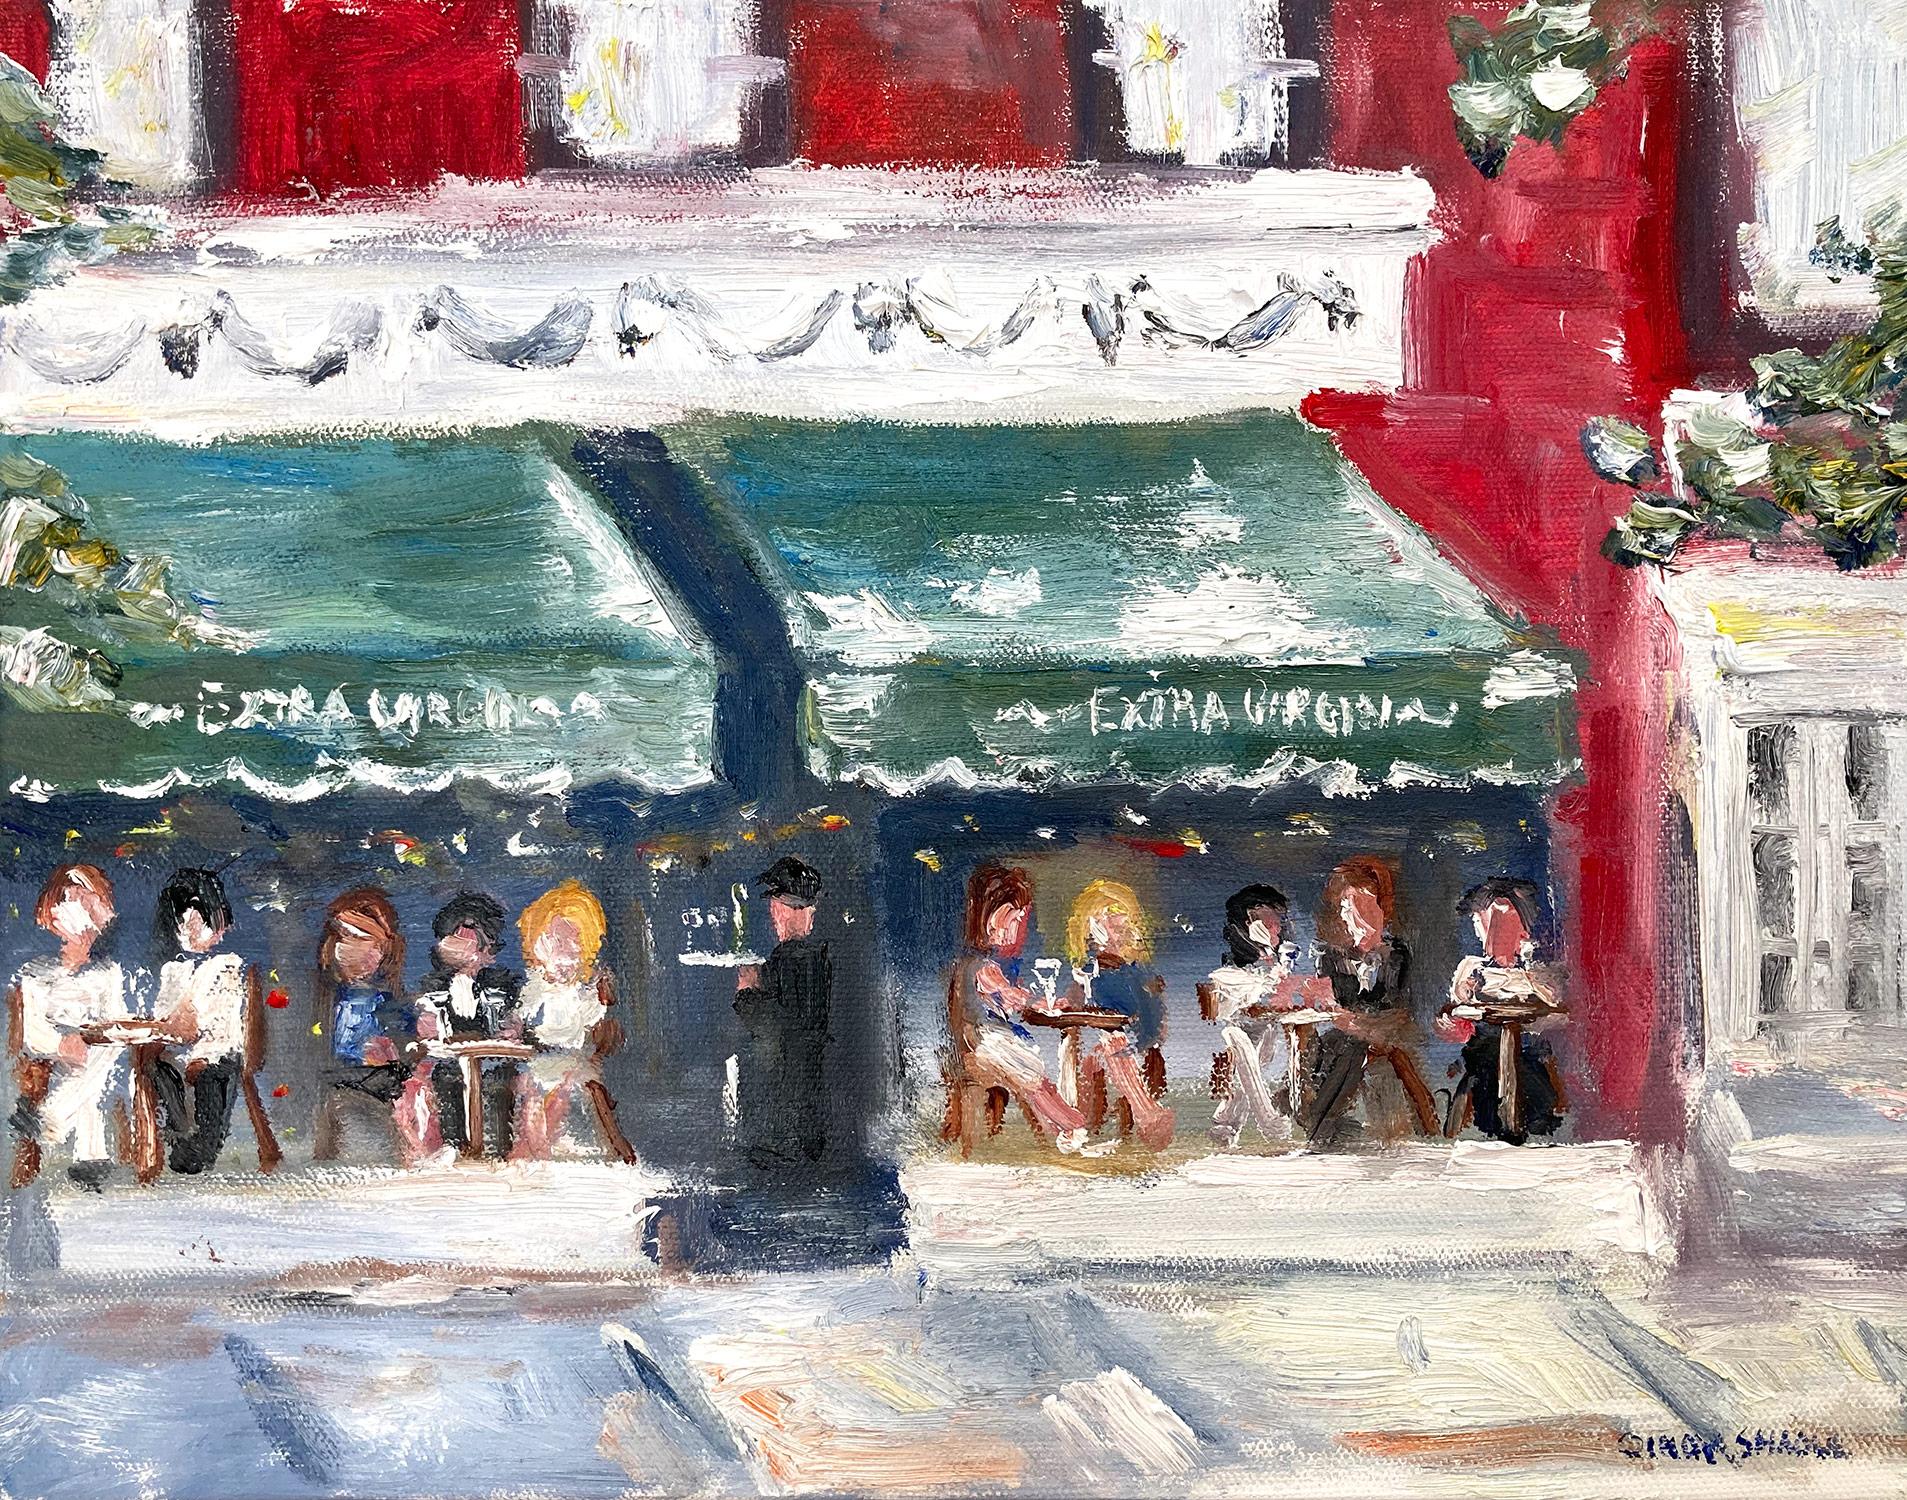 Cindy Shaoul Landscape Painting - "Brunch at Extra Virgin" Oil Painting of a Plein Air Street NYC with Figures